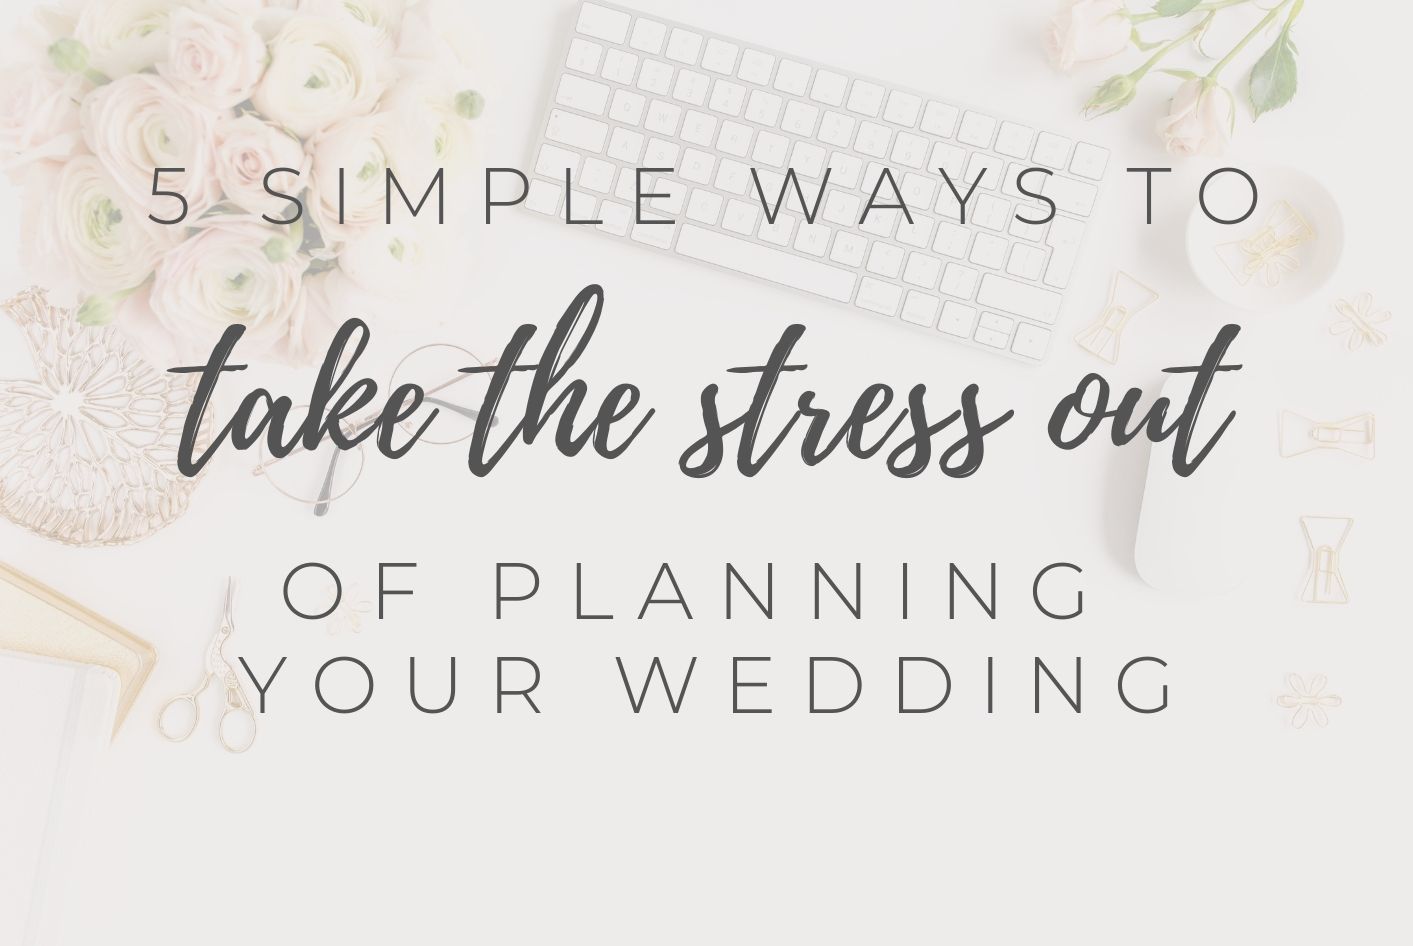 5 Simple Tips to Take the Stress Out of Planning Your Wedding